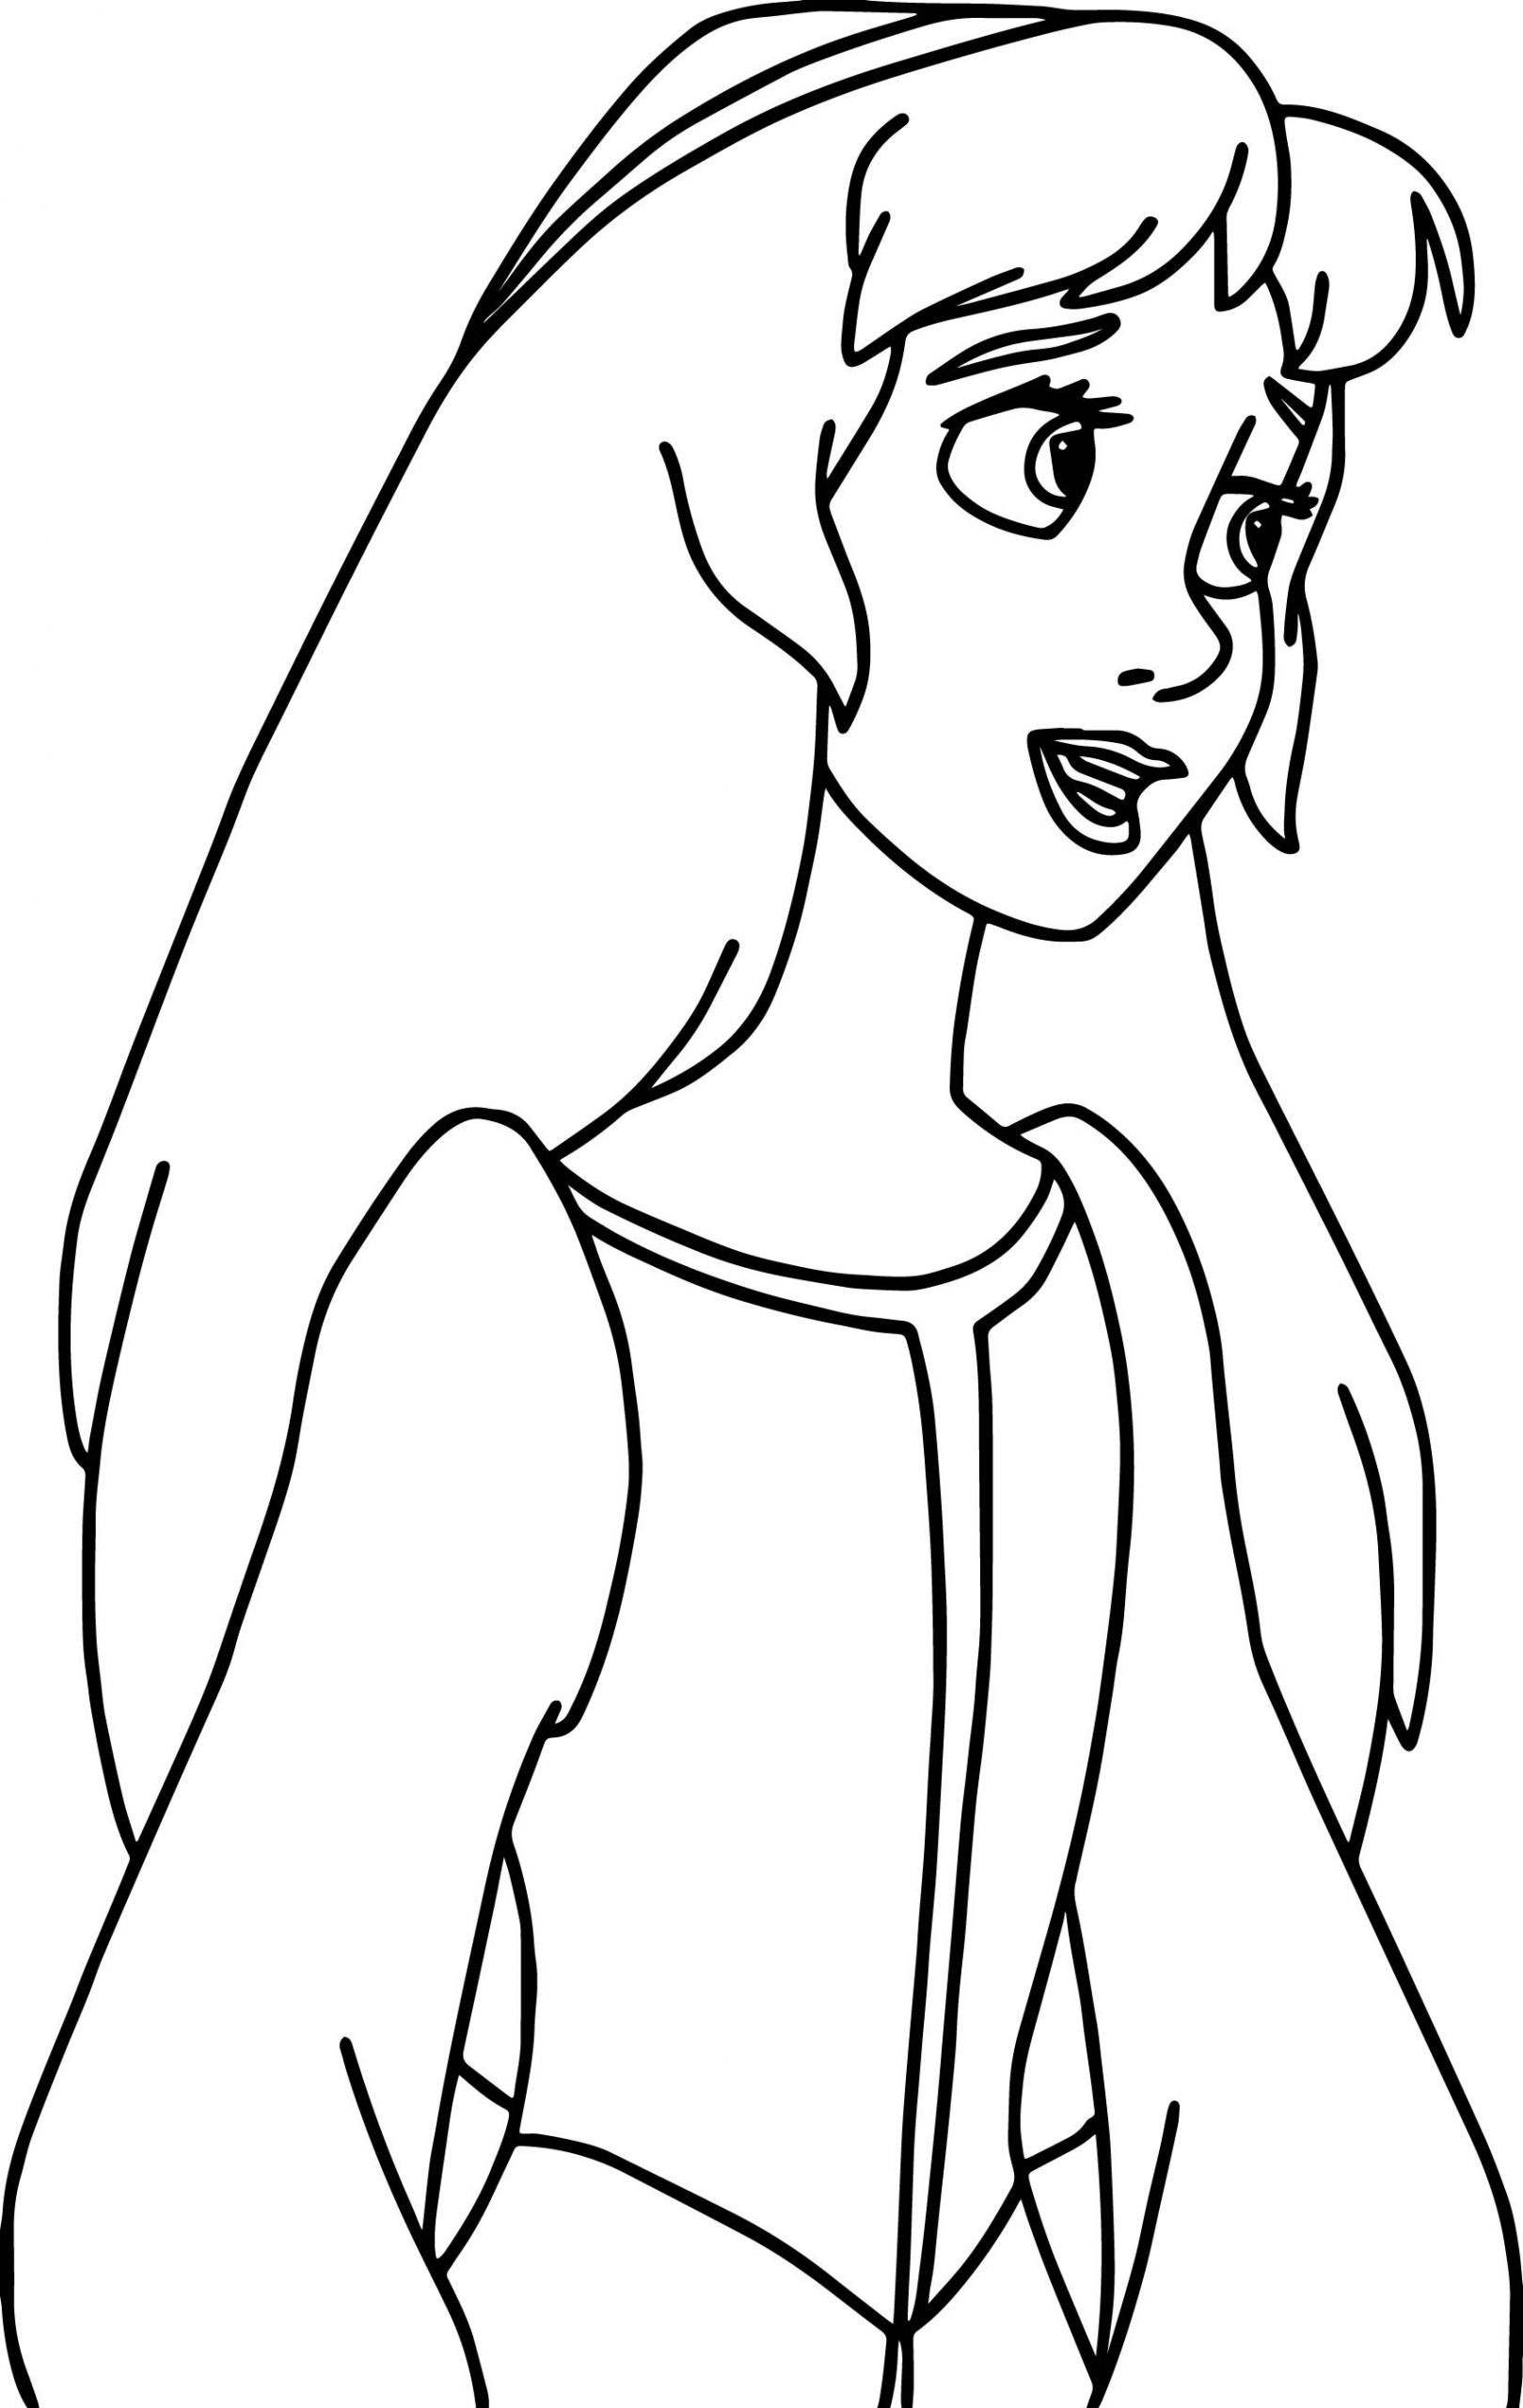 Coloring Pages Of Pretty Girls
 The Black Cauldron Eilonwy Pretty Girl Coloring Page